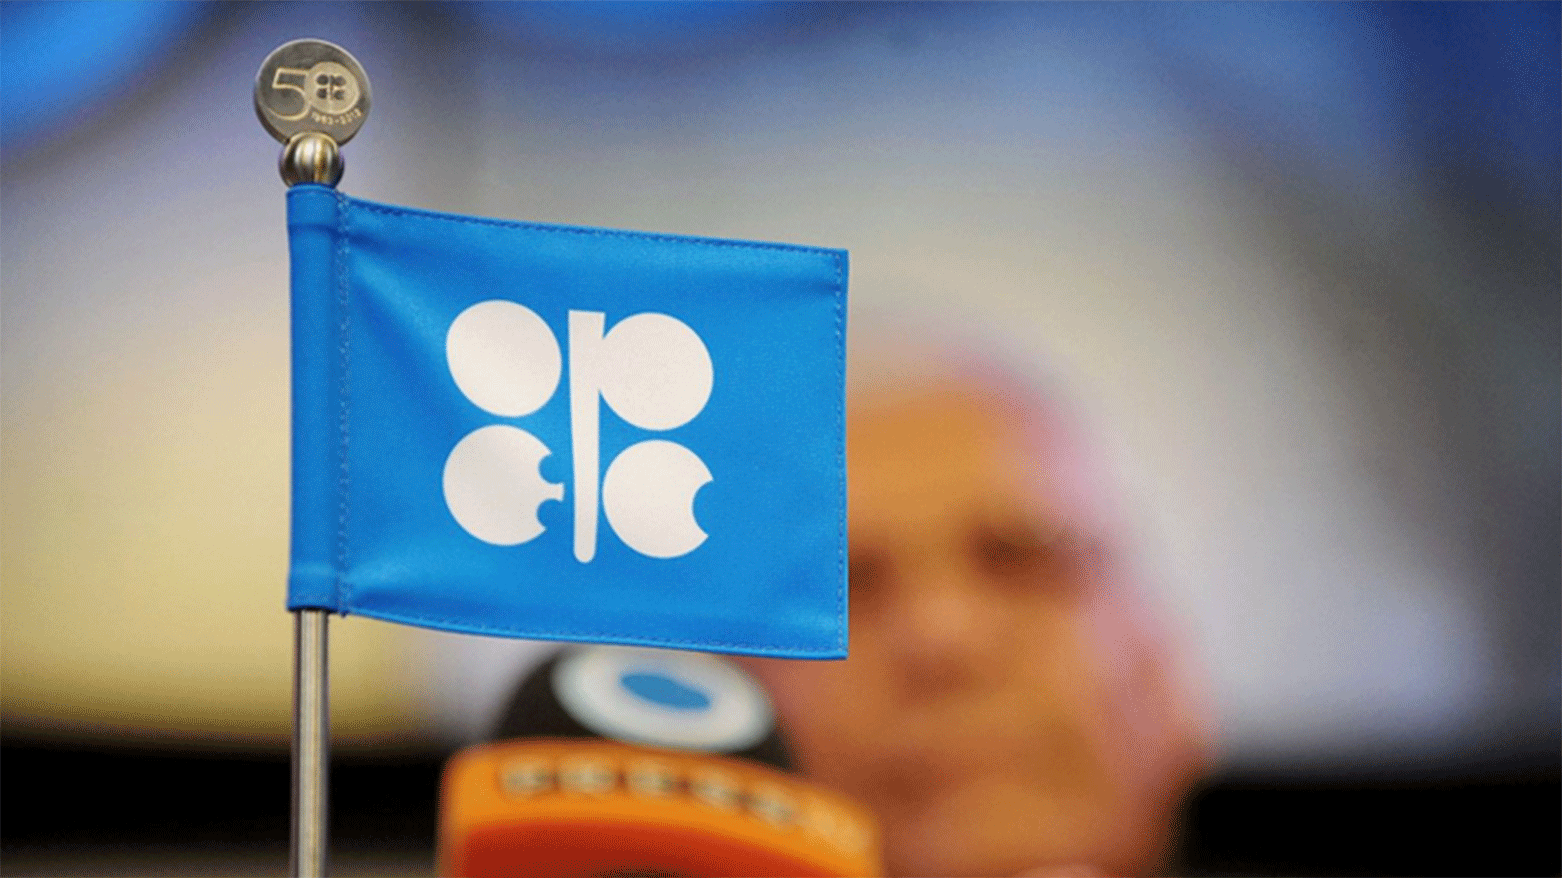 The flag of the Organization of the Petroleum Exporting Countries (OPEC). (Photo: AFP)